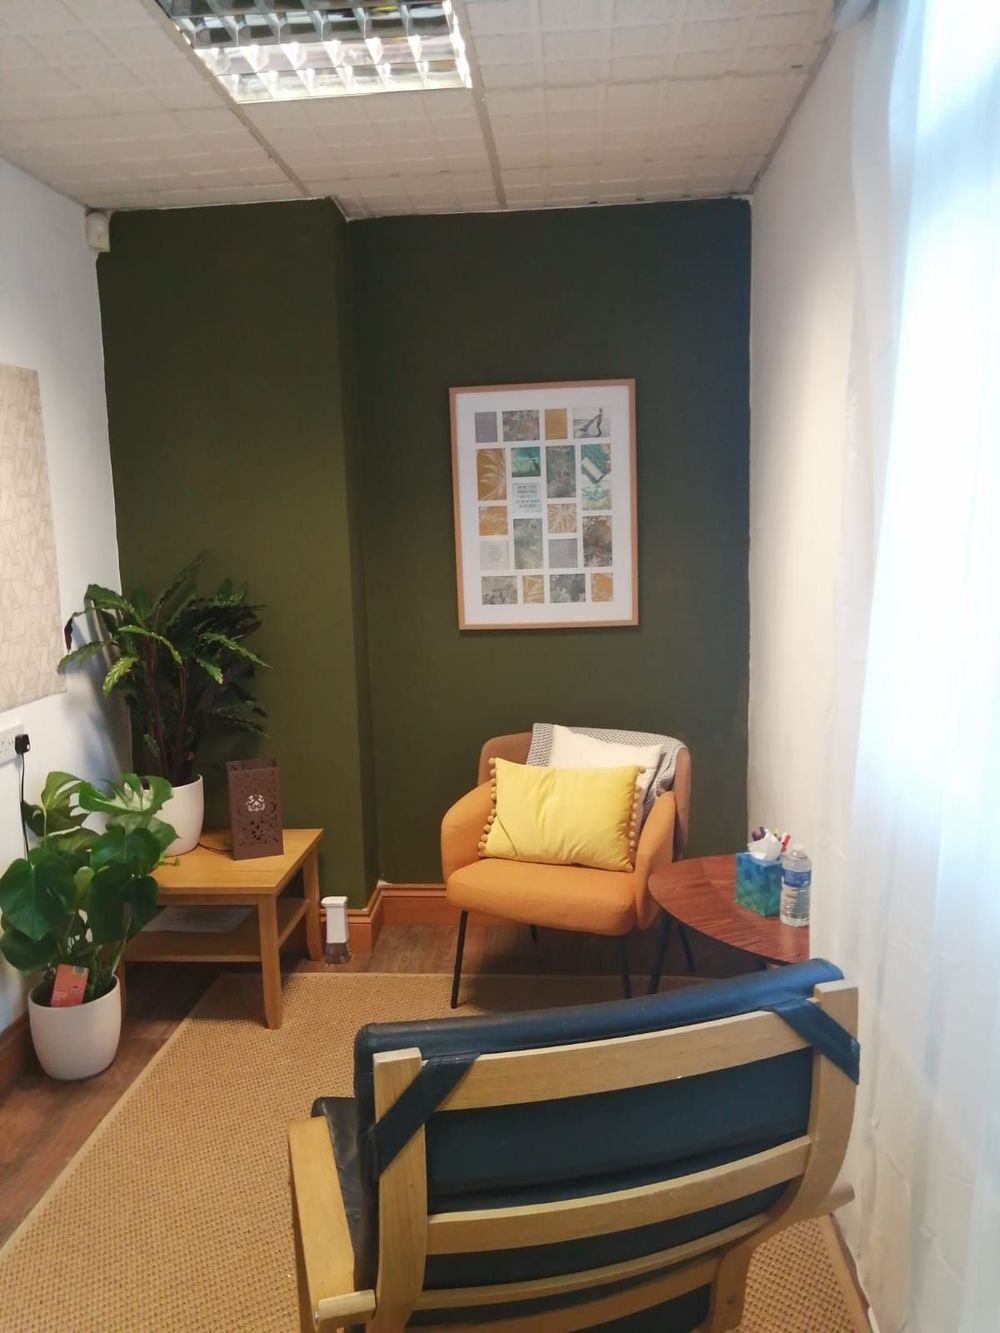 Our private counselling room